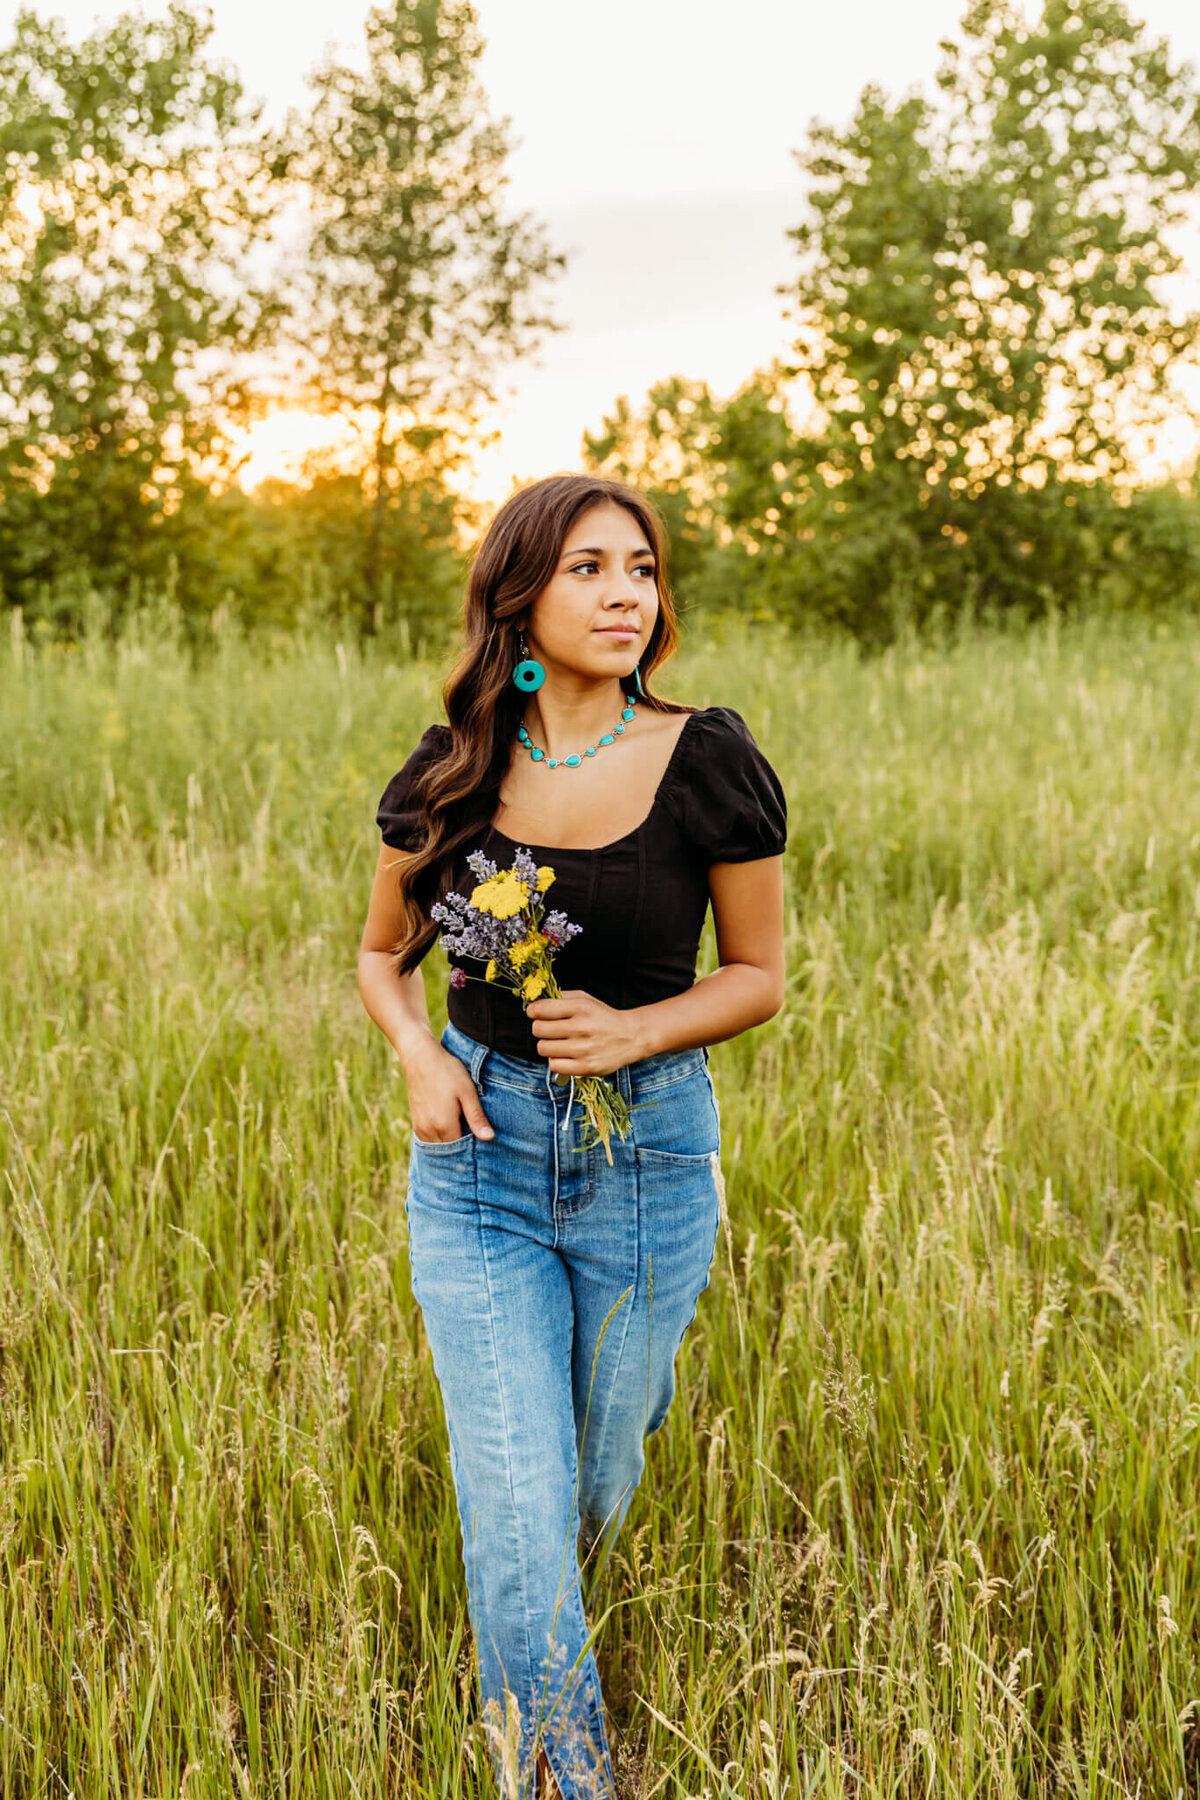 girl walking through a grassy field while holding a bouquet of wildflowers.